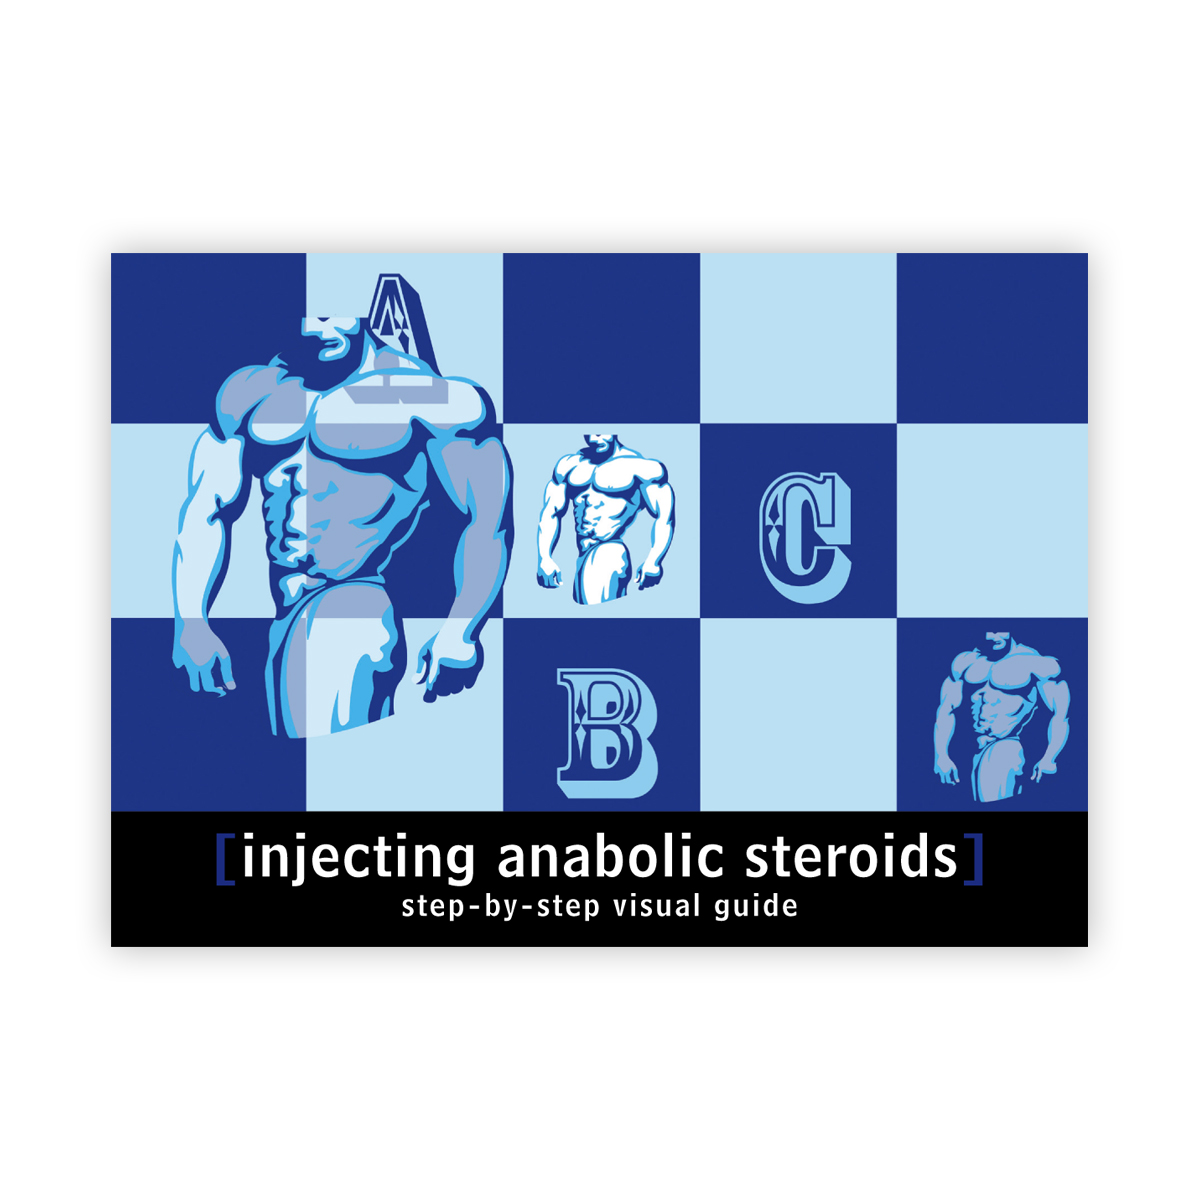 Injecting anabolic steroids